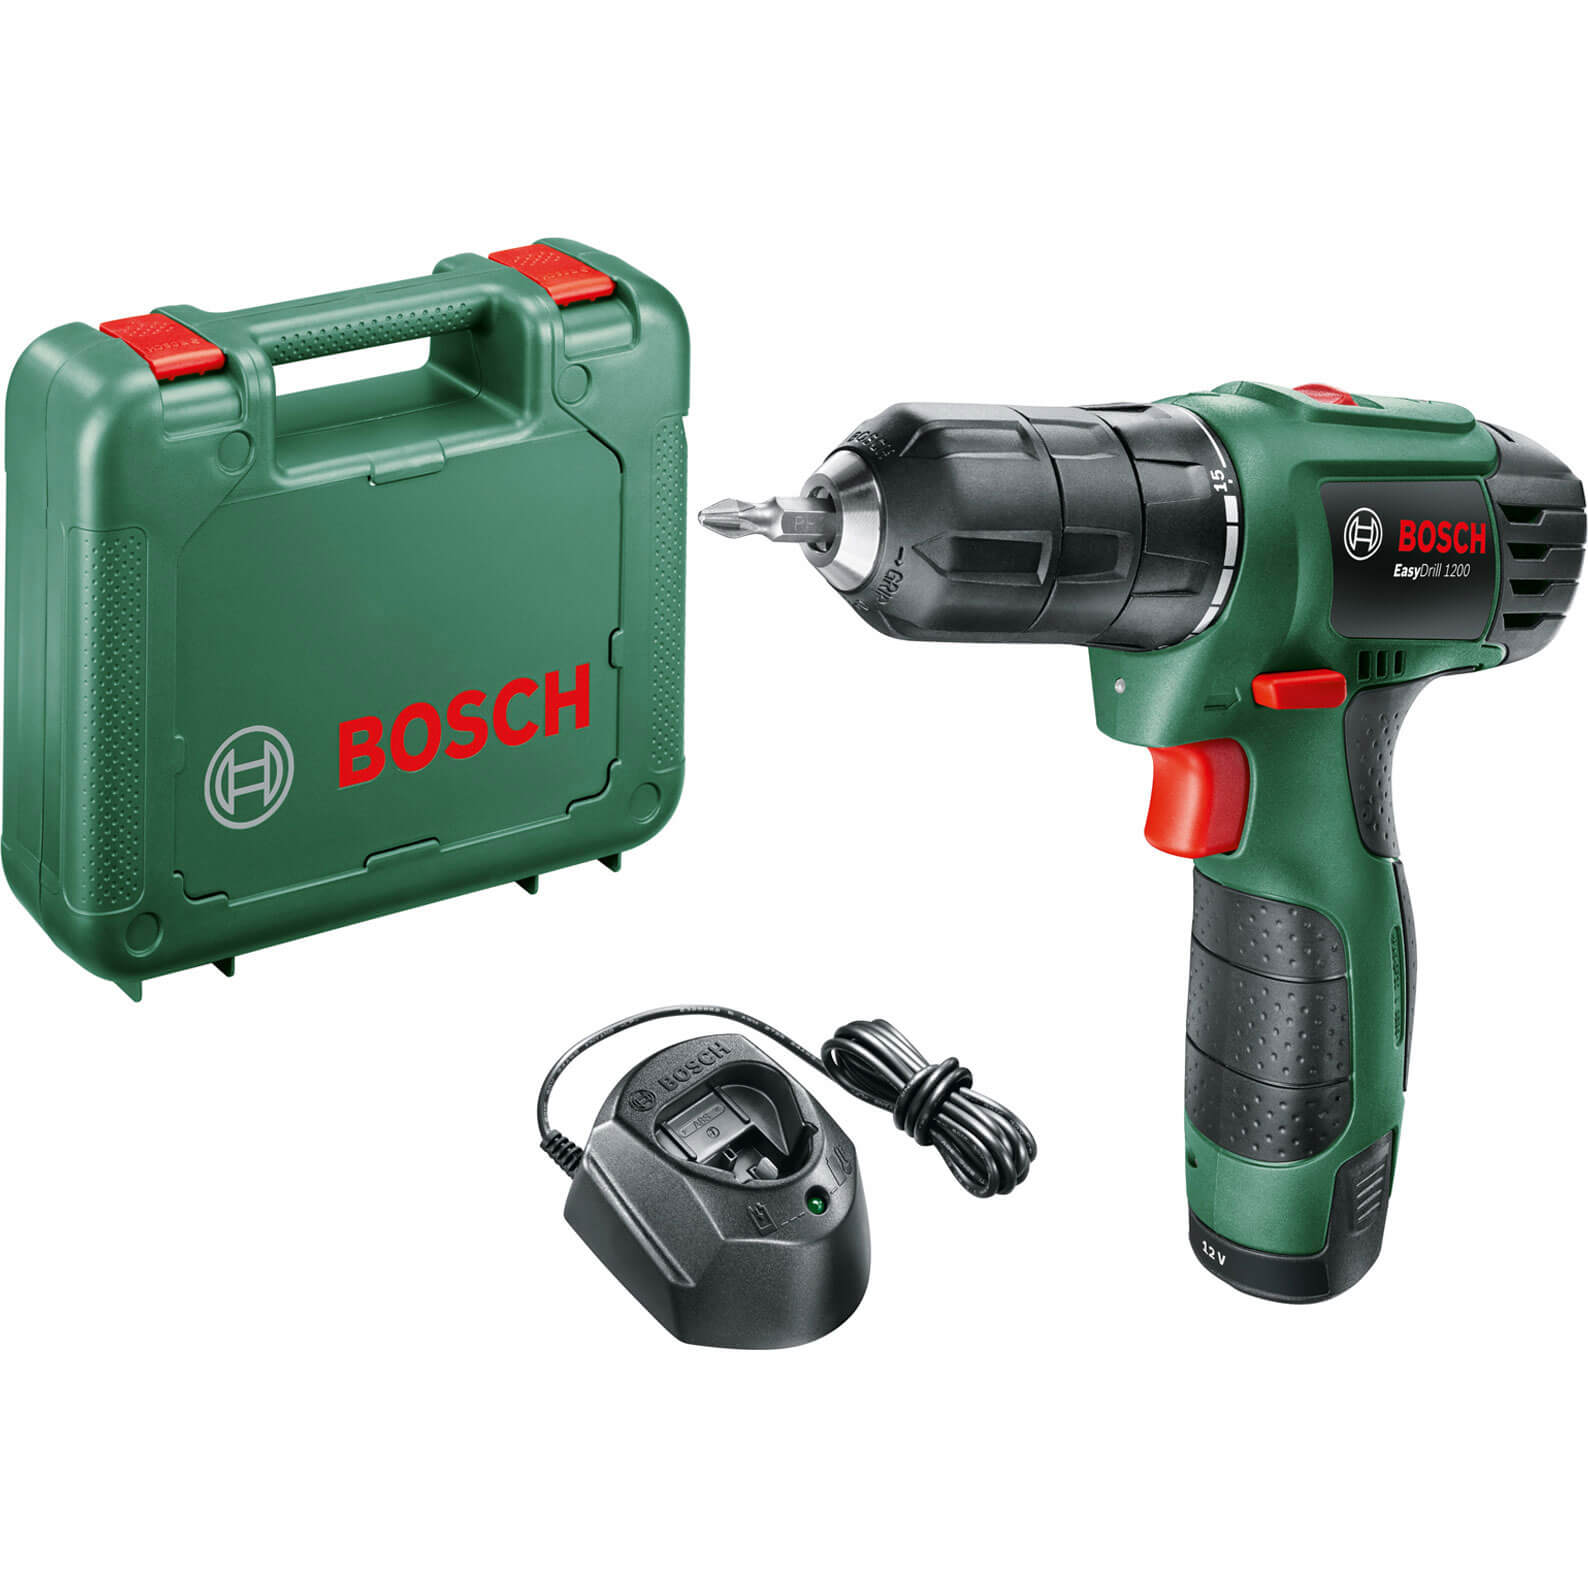 Bosch EASYDRILL 1200 12v Cordless Drill Driver 1 x 1.5ah Li-ion Charger Case